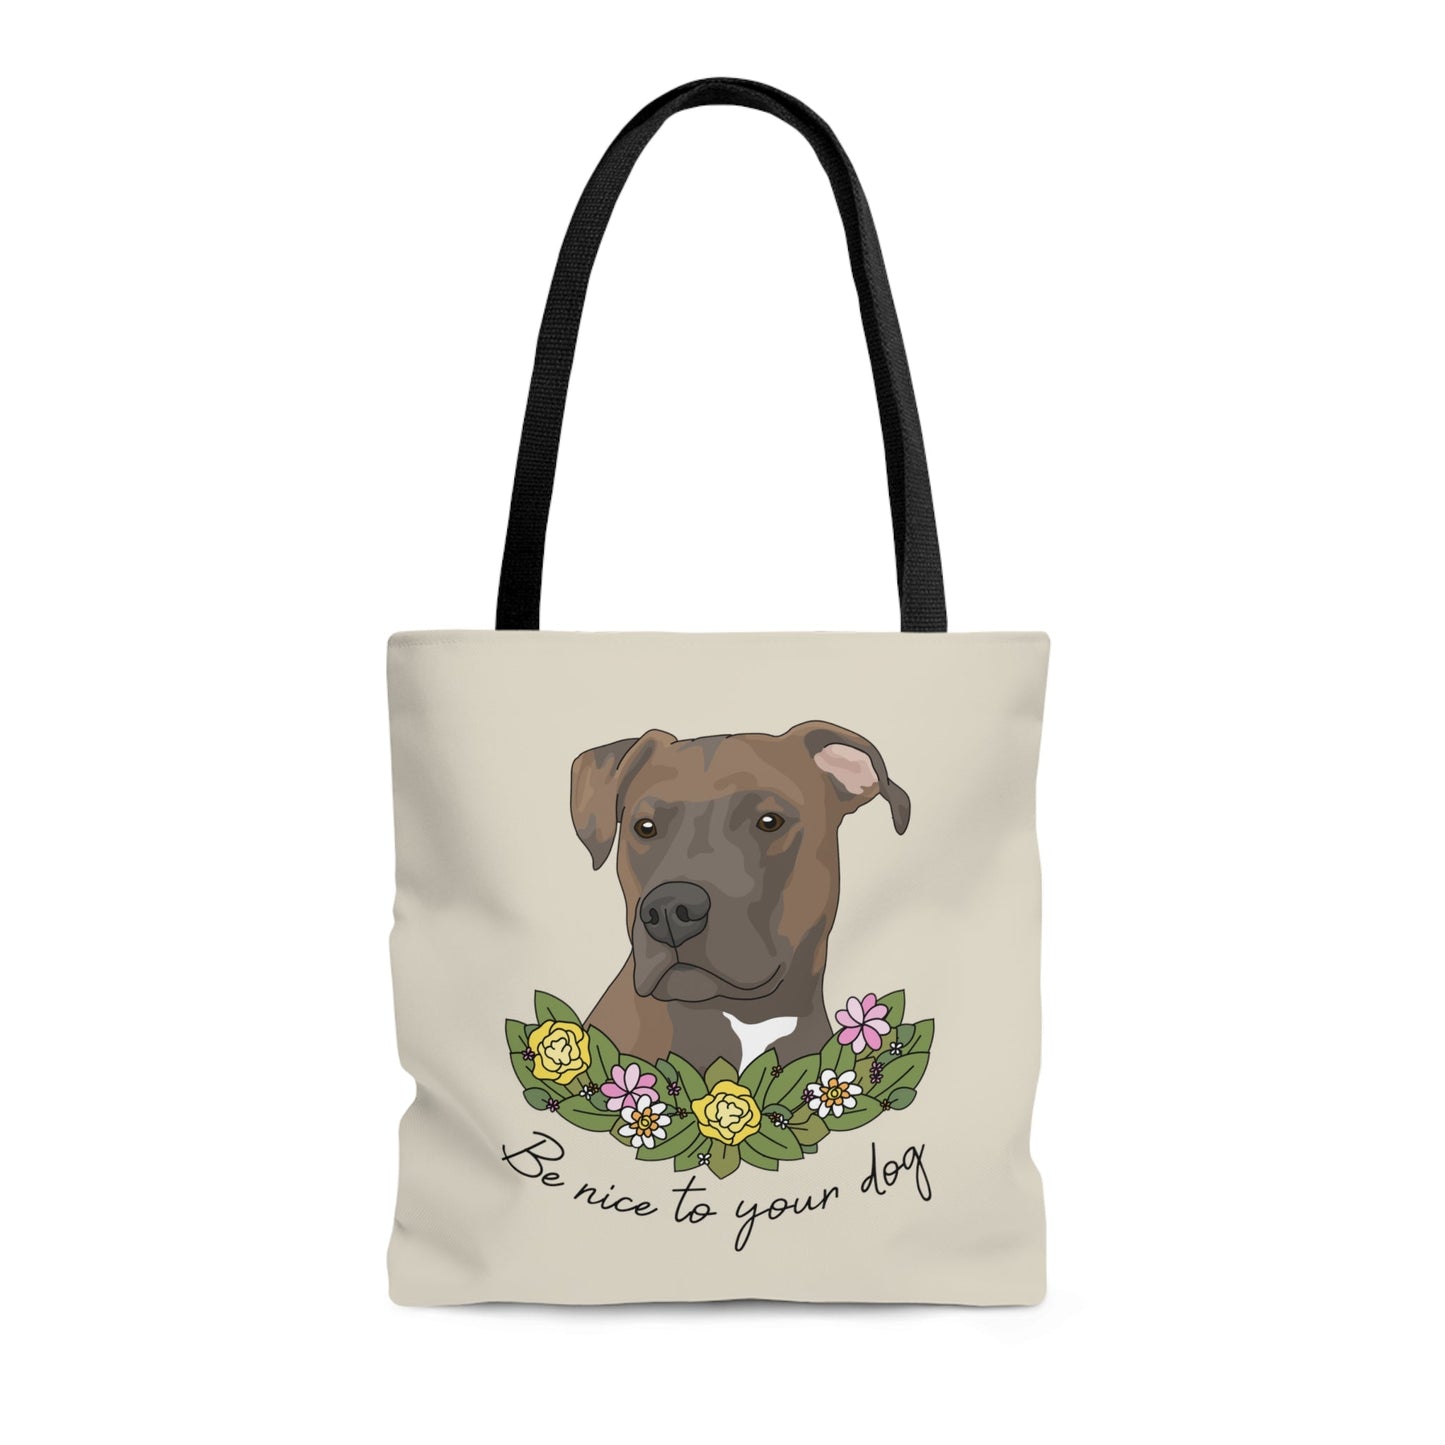 Be Nice to Your Dog | Tote Bag - Detezi Designs-11062708273046595741